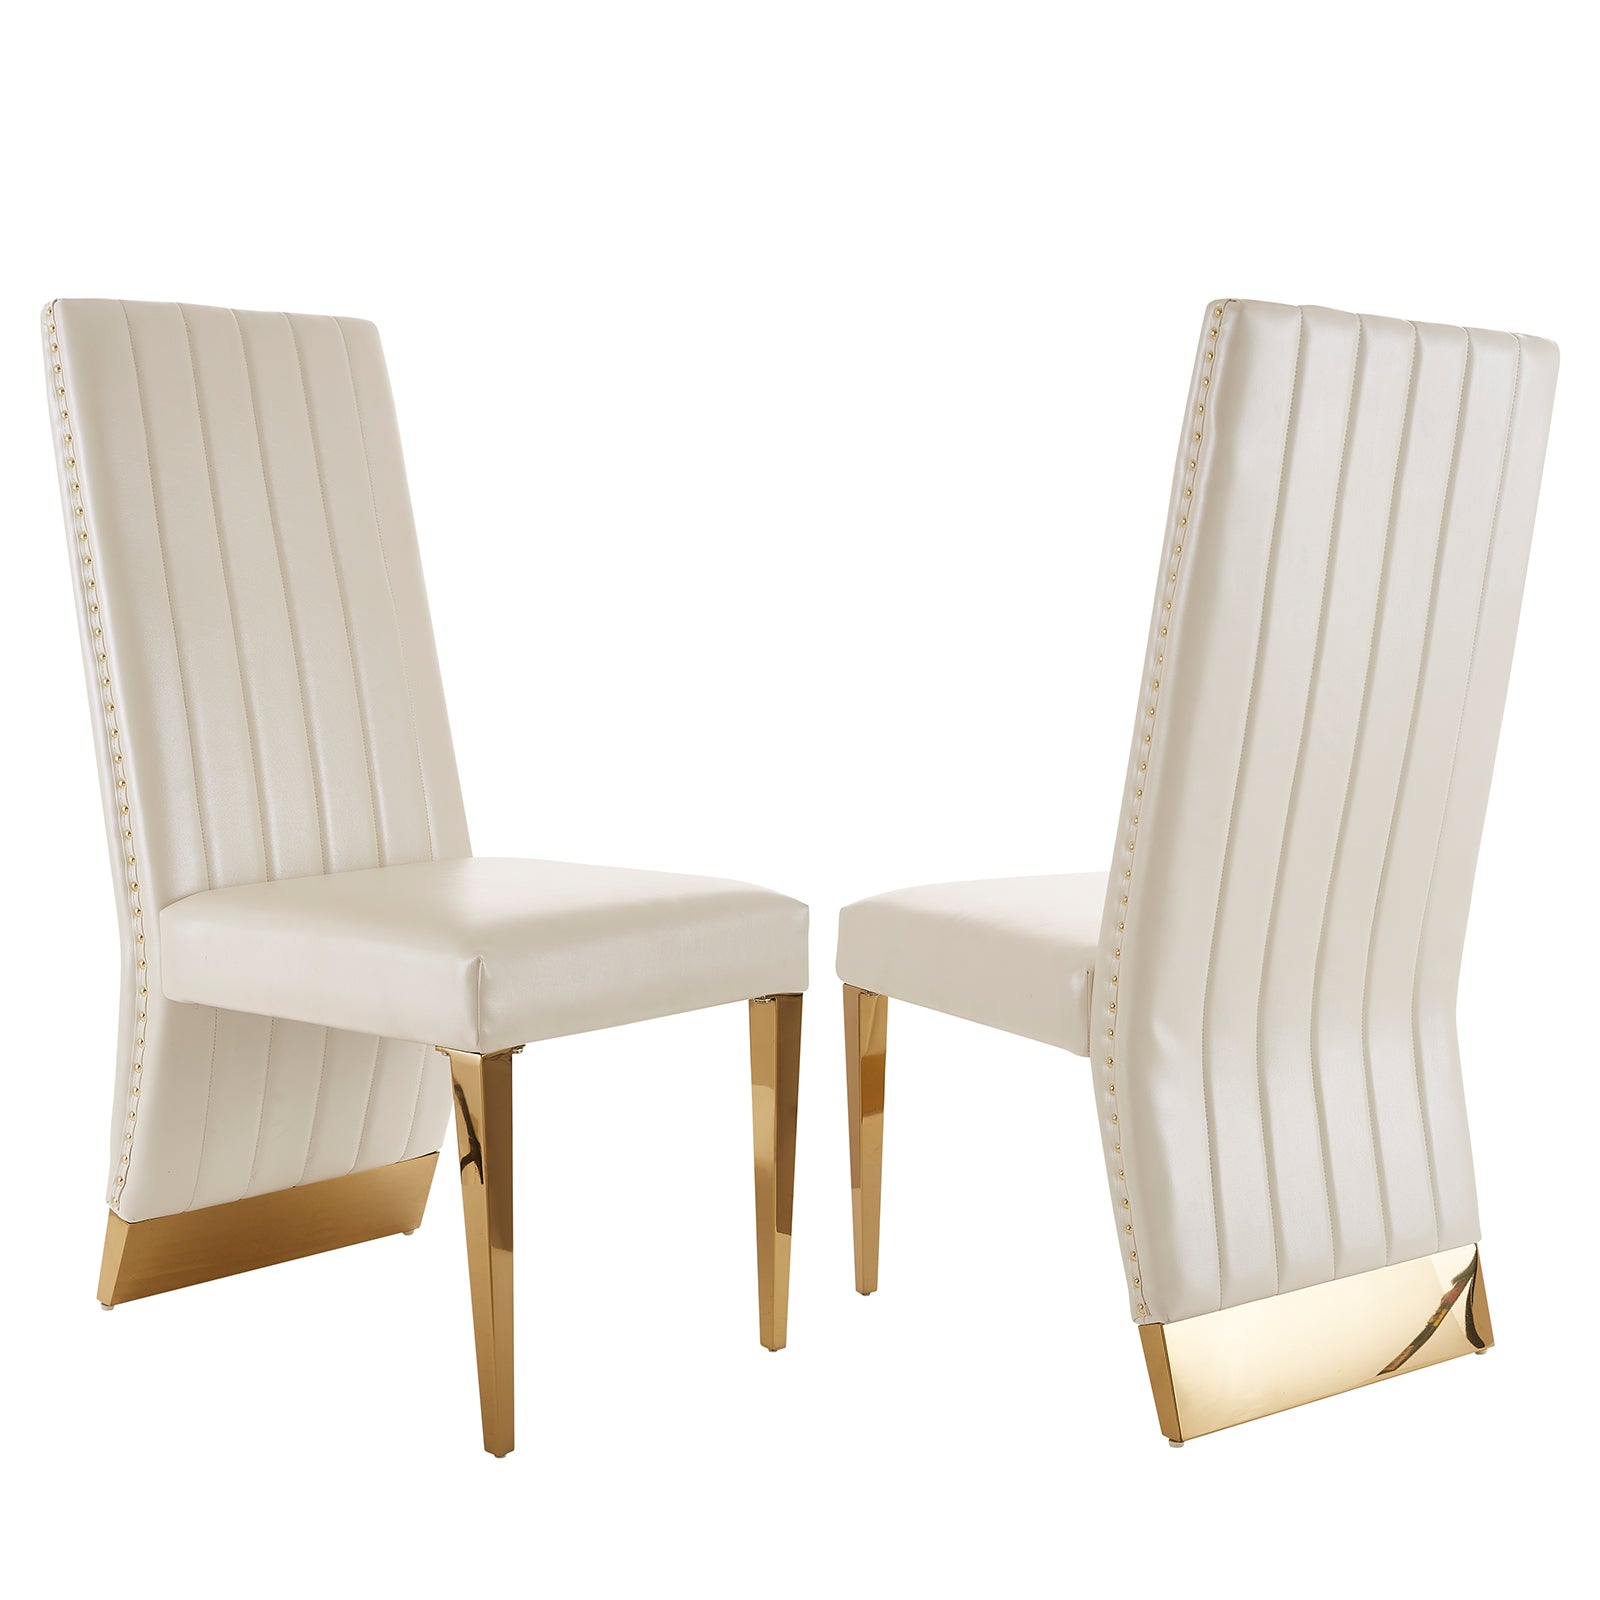 Luxurious White Leather Dining Chairs with Gold Accents for Elegant Dining Spaces